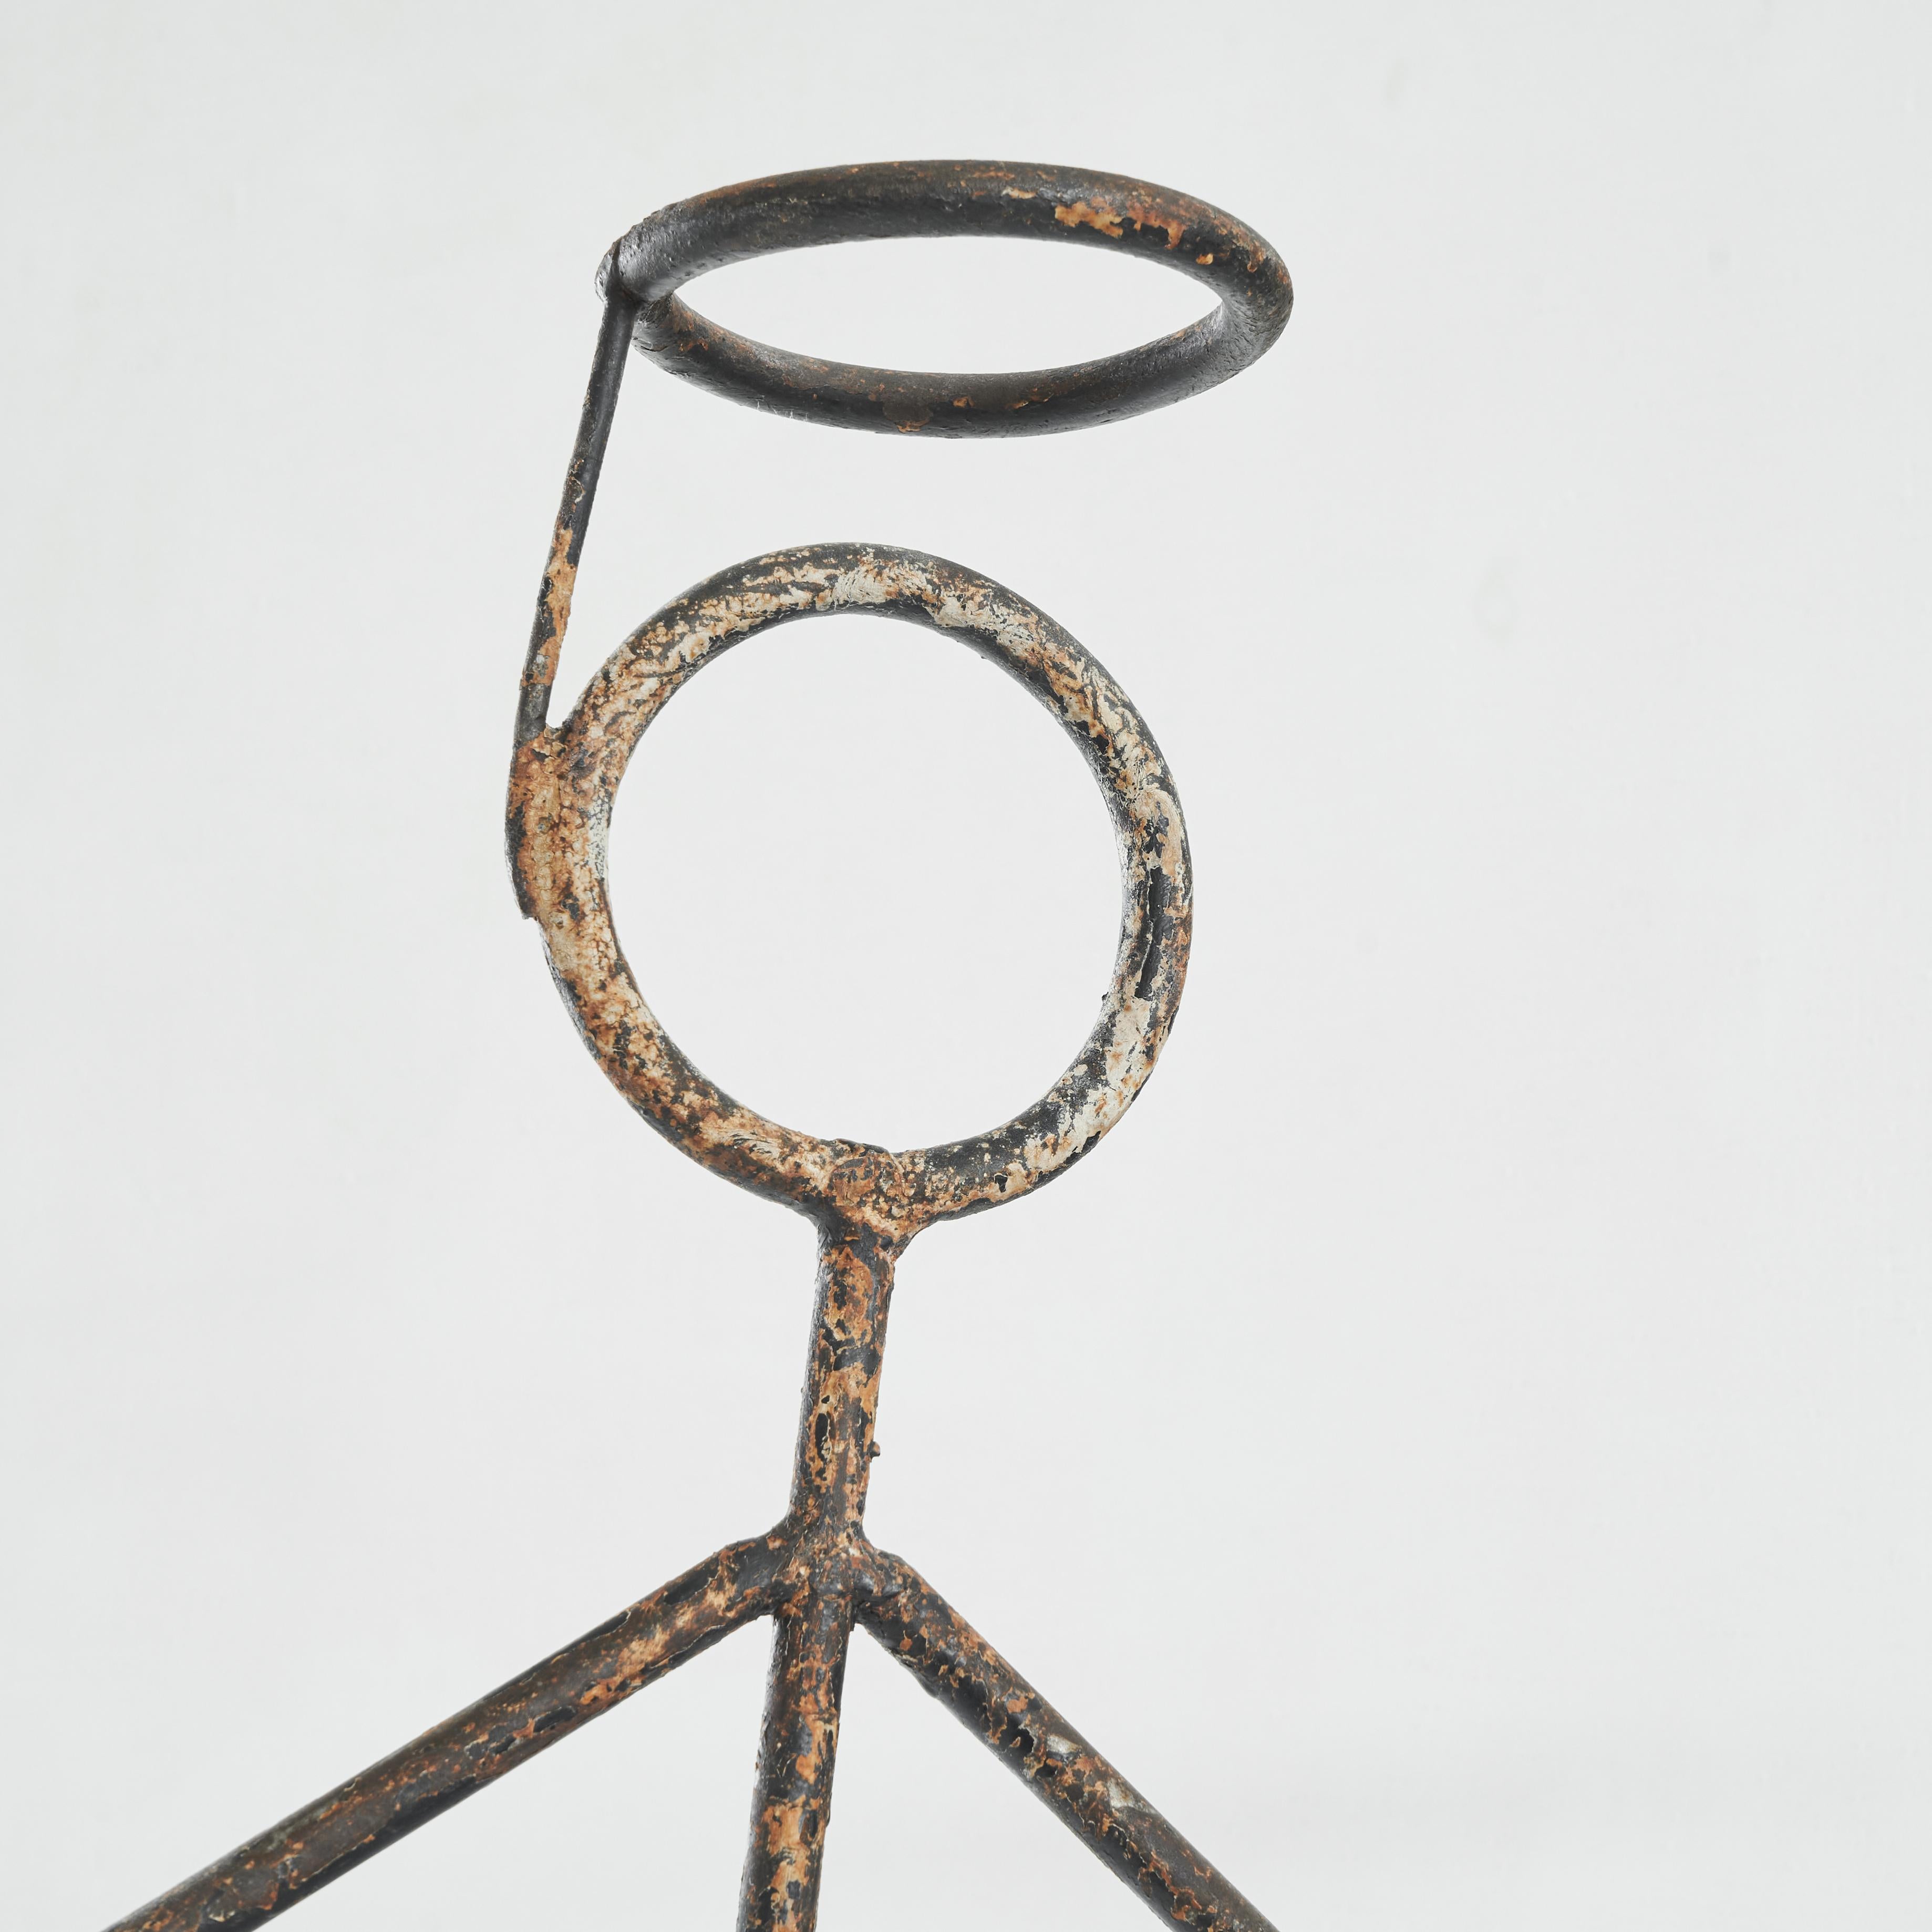 Unique 'The Saint' Stickman Occasional Table From the Film Set 1960s.

This is a real gem and a unique opportunity to own something which was used at the film set of the famous television series 'The Saint' with Roger Moore as Simon Templar in the